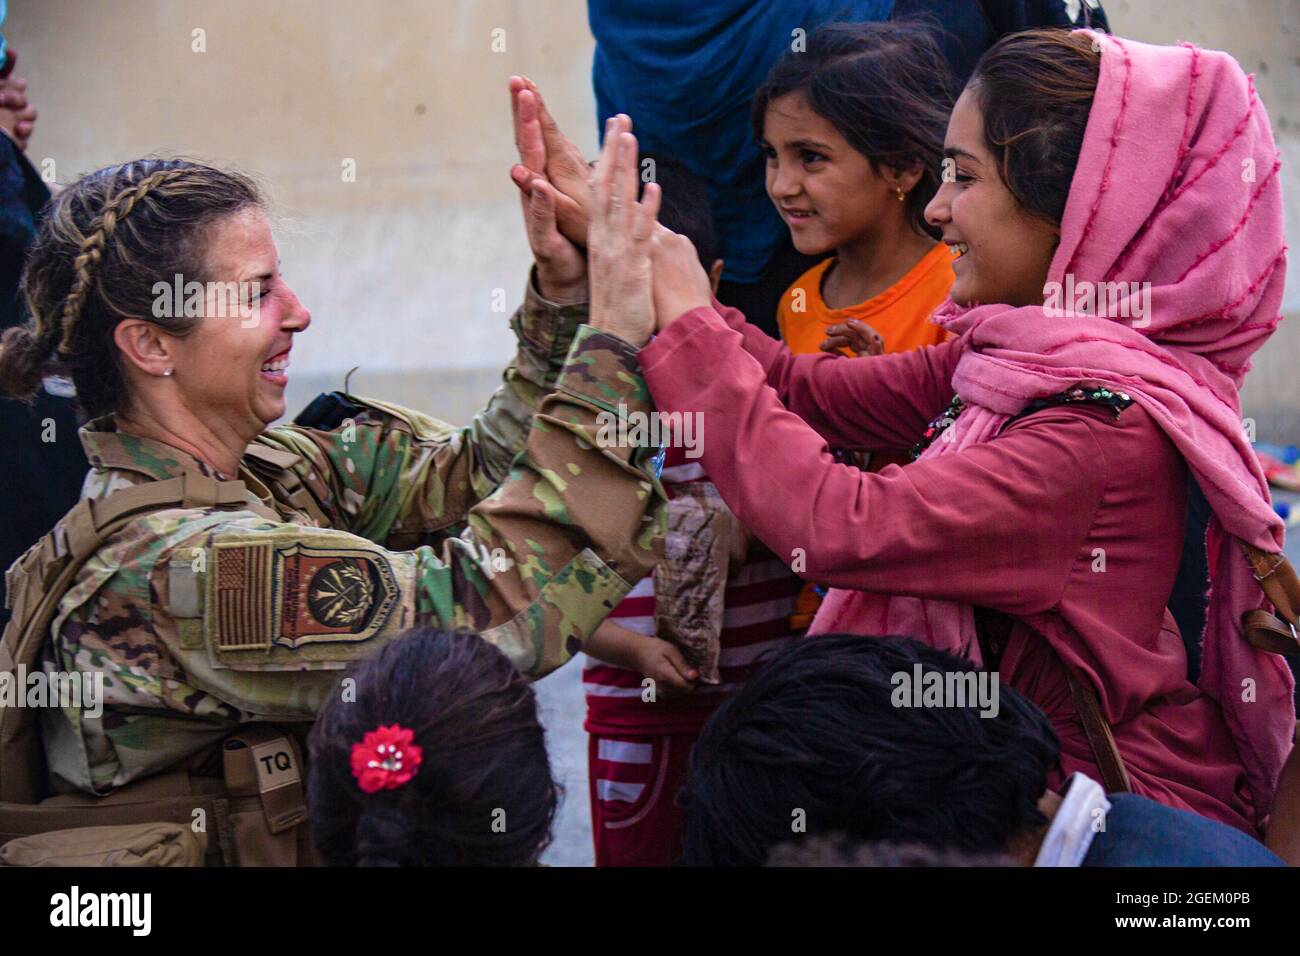 A U.S. Airman with the Joint Task Force-Crisis Response high fives child after helping reunite their family at Hamid Karzai International Airport, Afghanistan, Aug. 20. U.S. service members are assisting the Department of State with a Non-combatant Evacuation Operation (NEO) in Afghanistan. (U.S. Marine Corps photo by Cpl. Davis Harris) Stock Photo